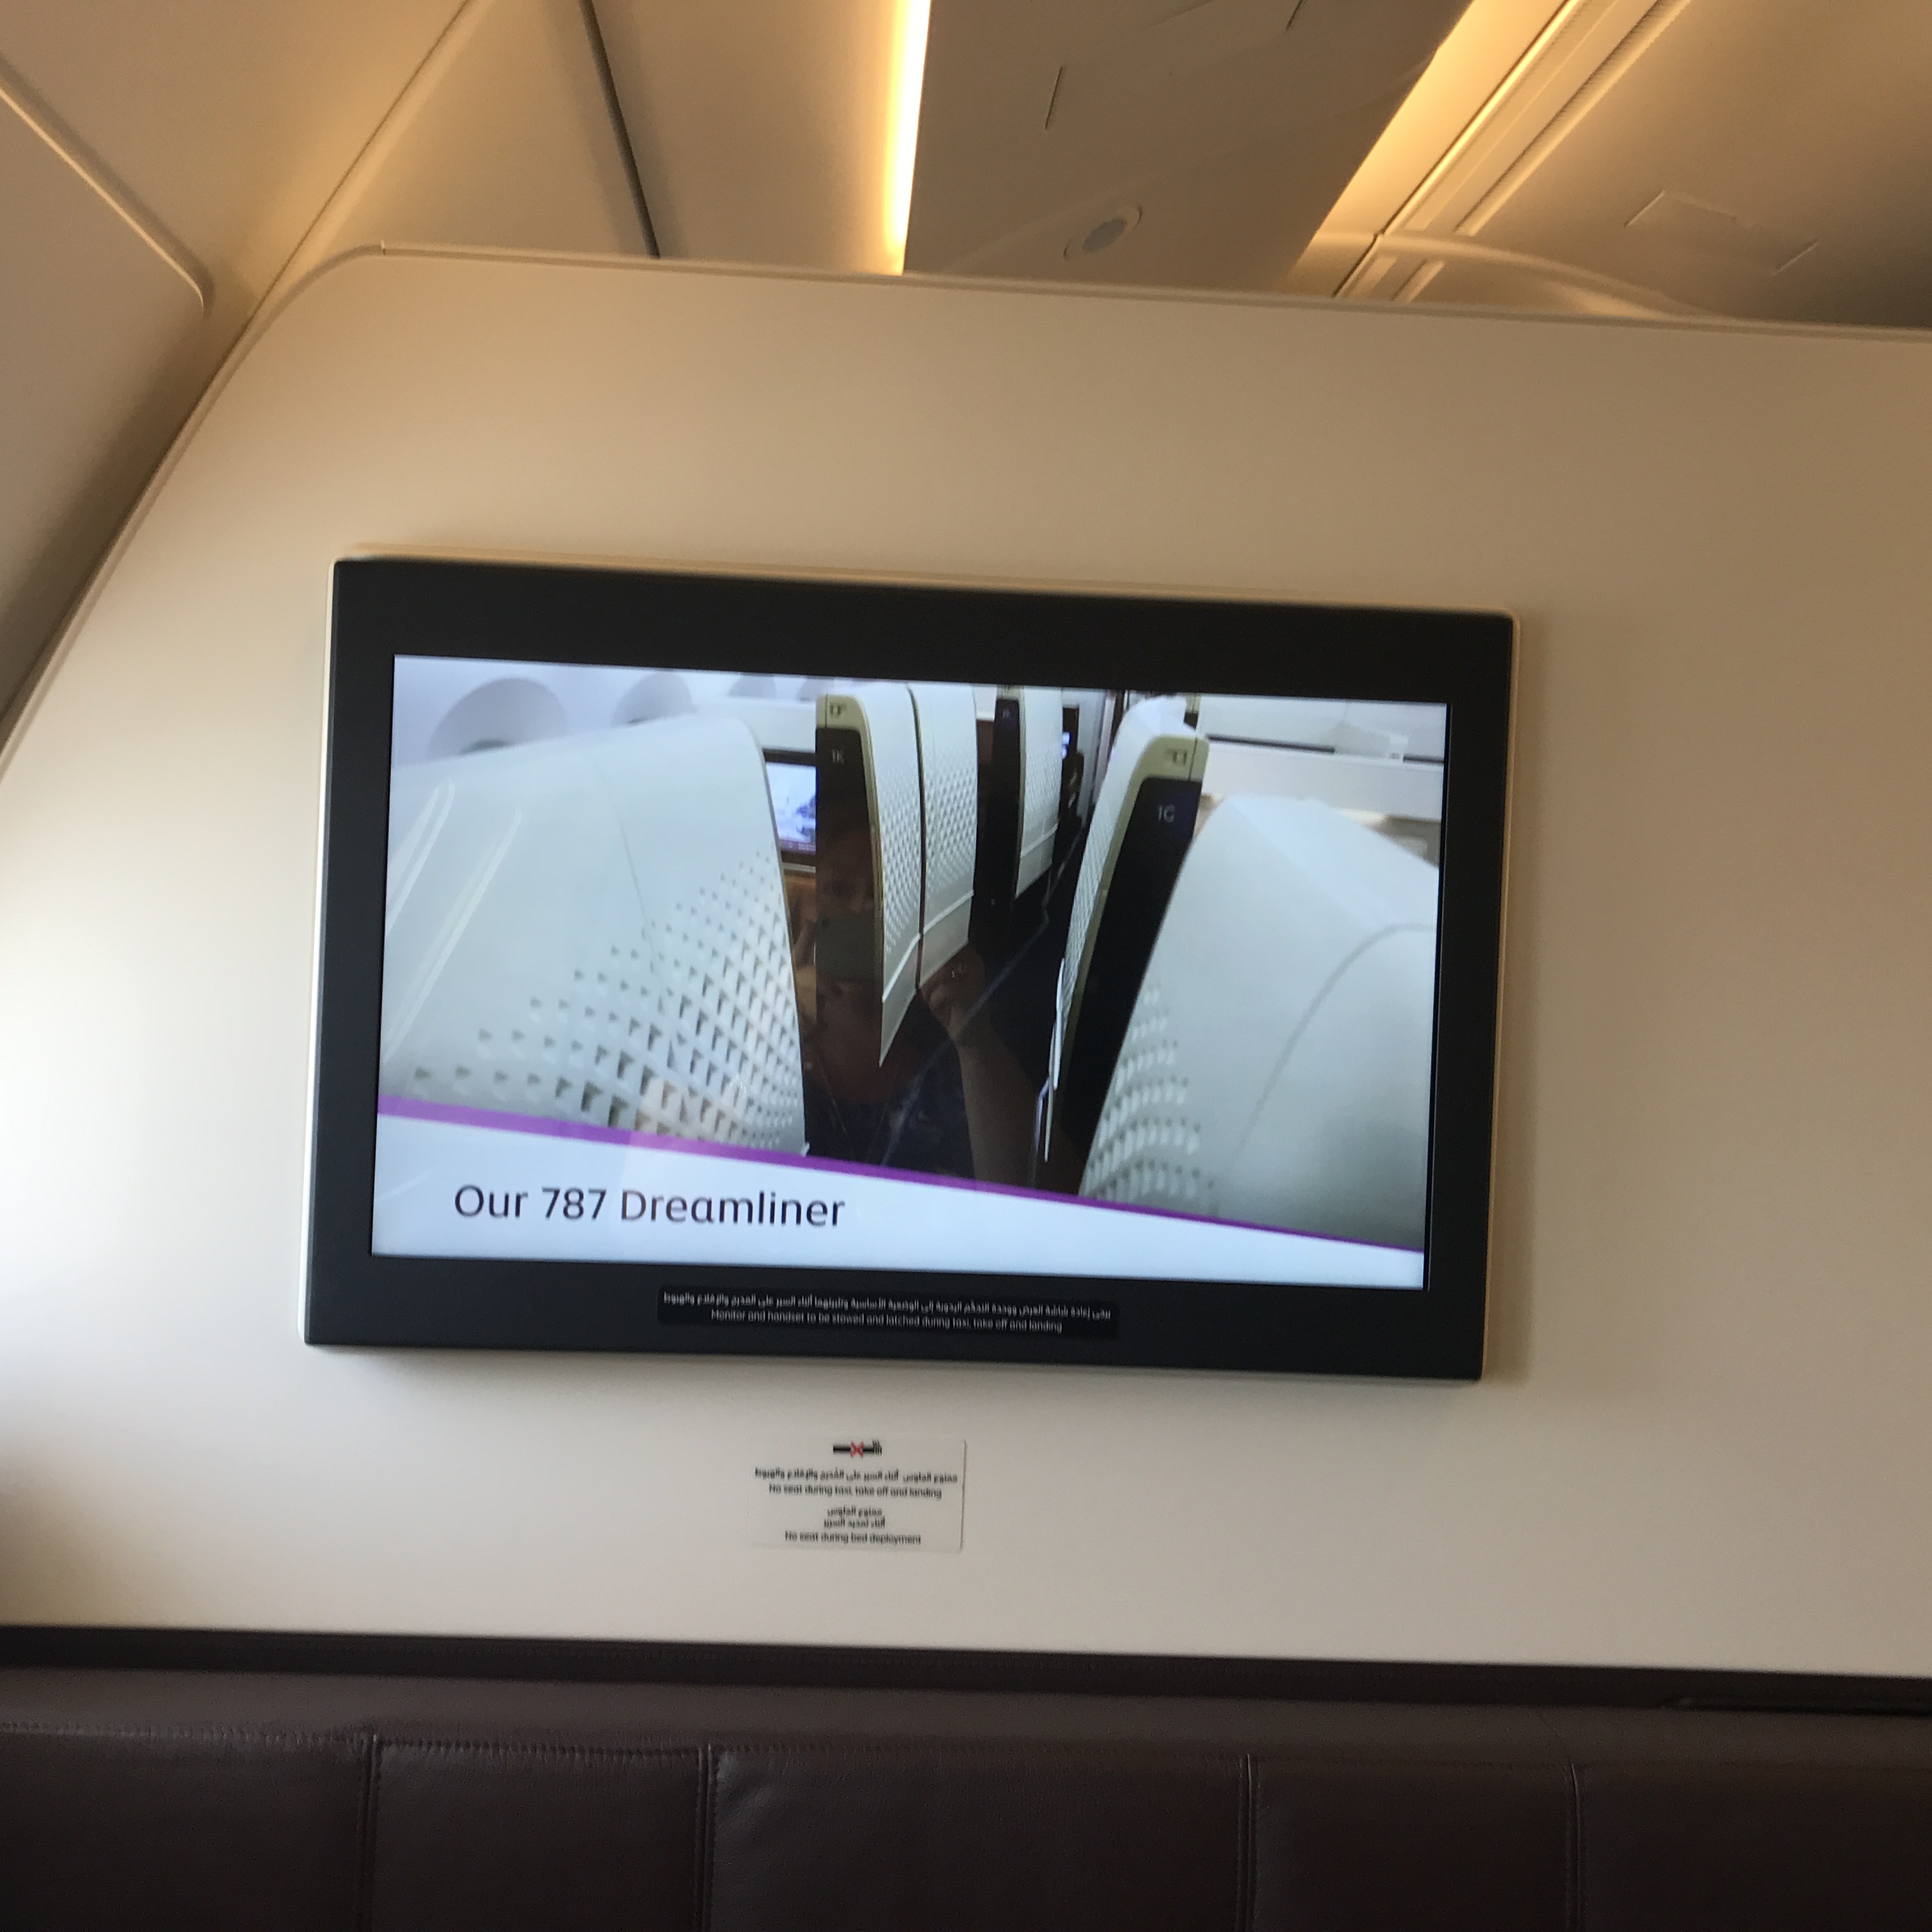 Etihad First class apartment A380 review